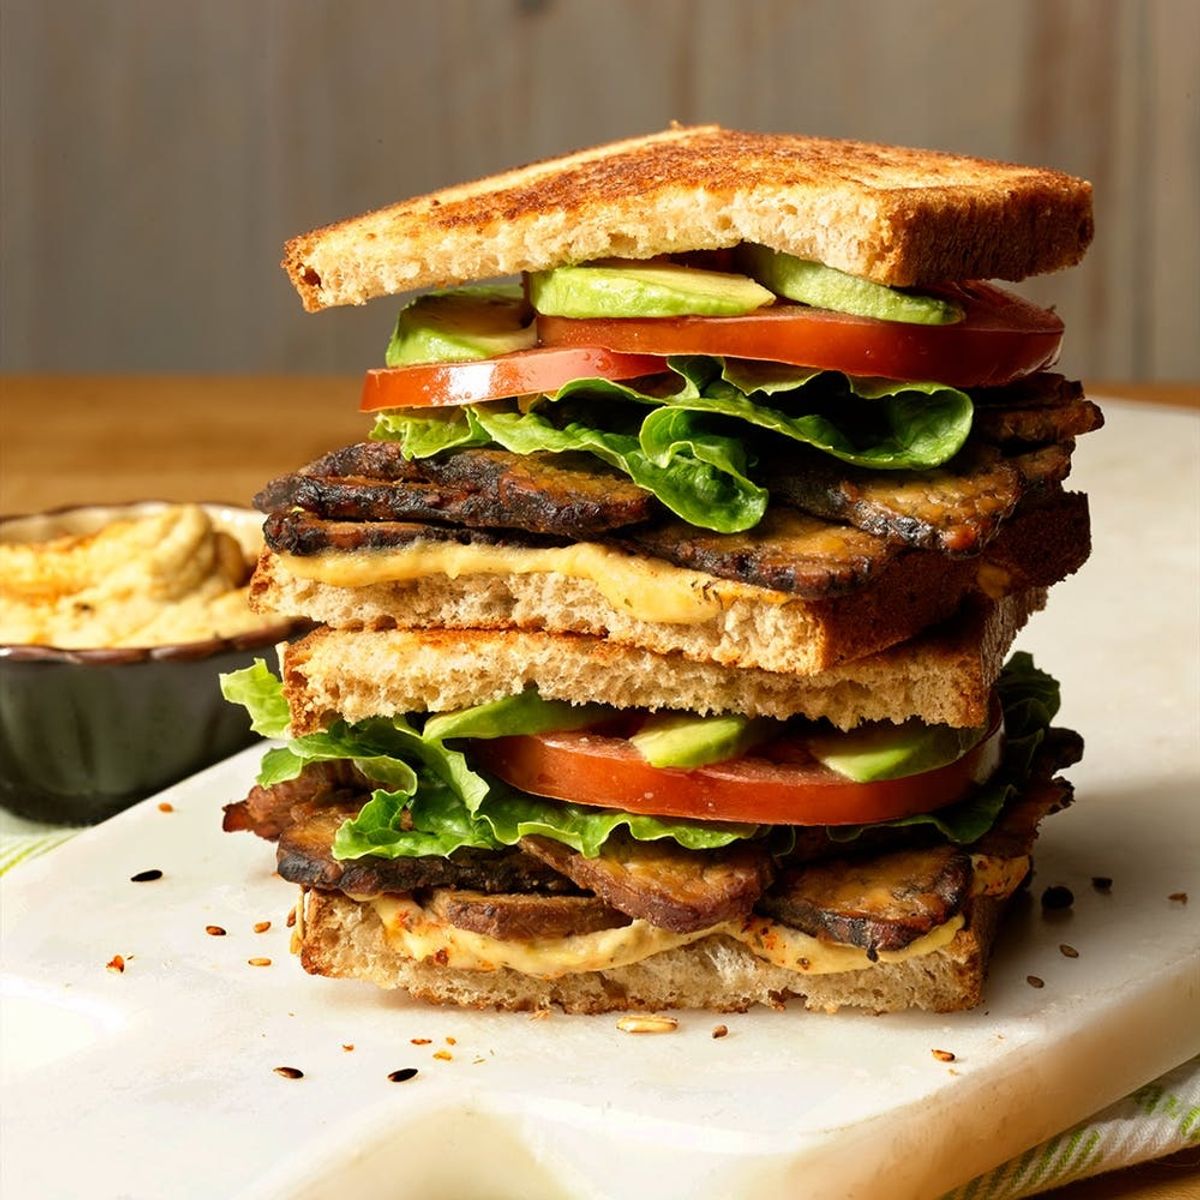 Whole Foods Market’s Vegan TTLA Sandwich Has Gone Viral — Here’s Why You’ll Want a Bite